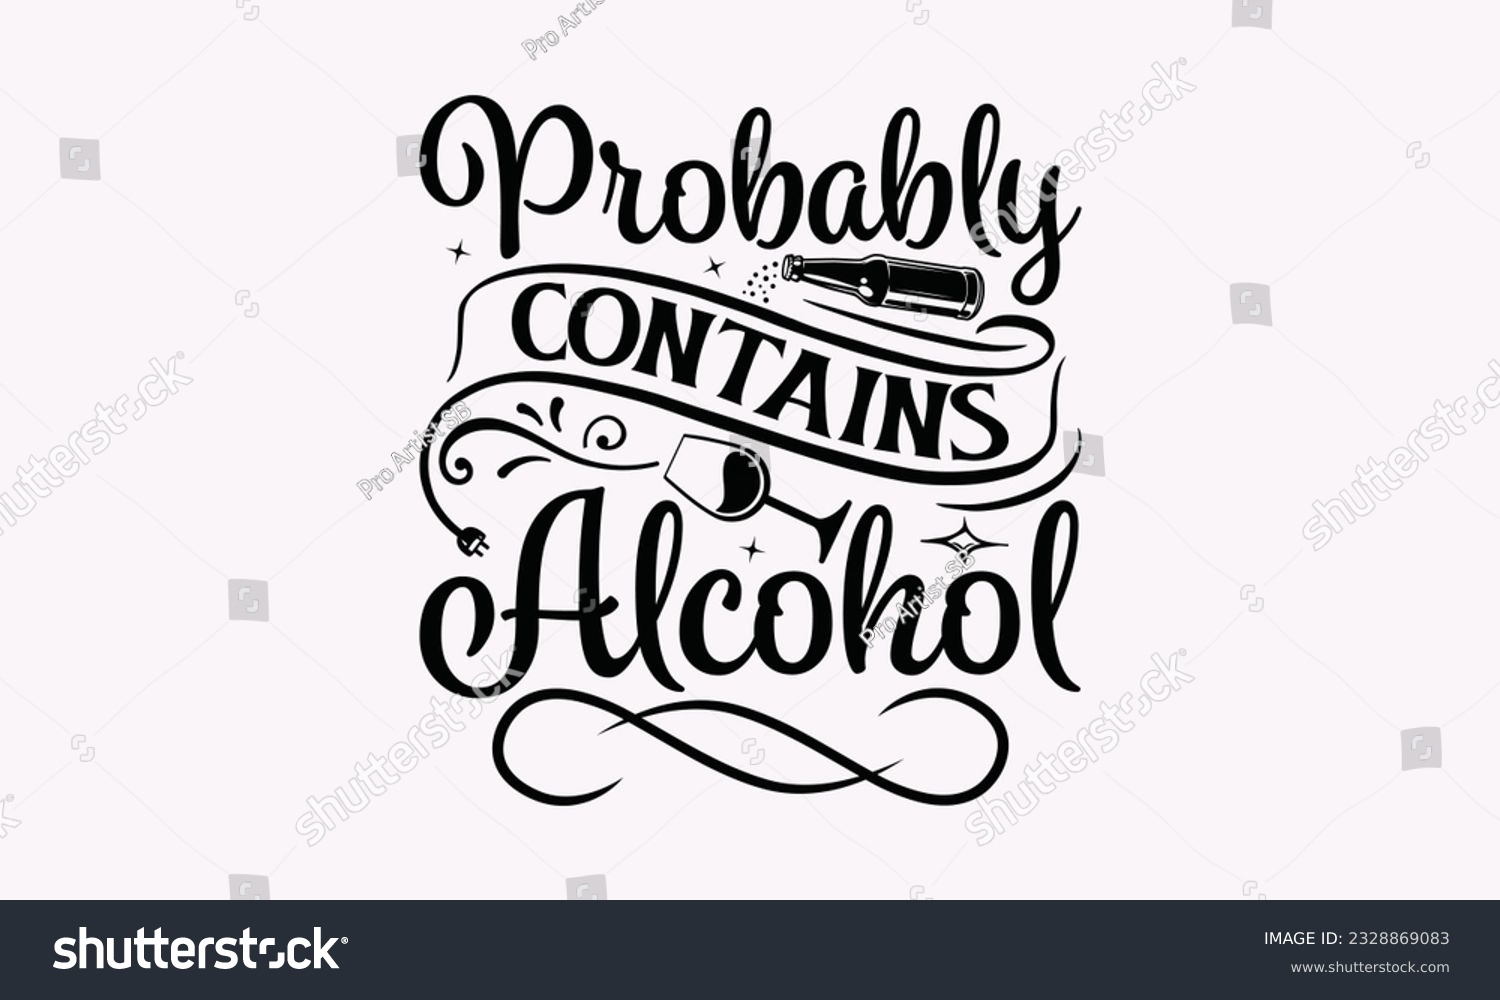 SVG of Probably Contains Alcohol - Alcohol SVG Design, Cheer Quotes, Hand drawn lettering phrase, Isolated on white background. svg